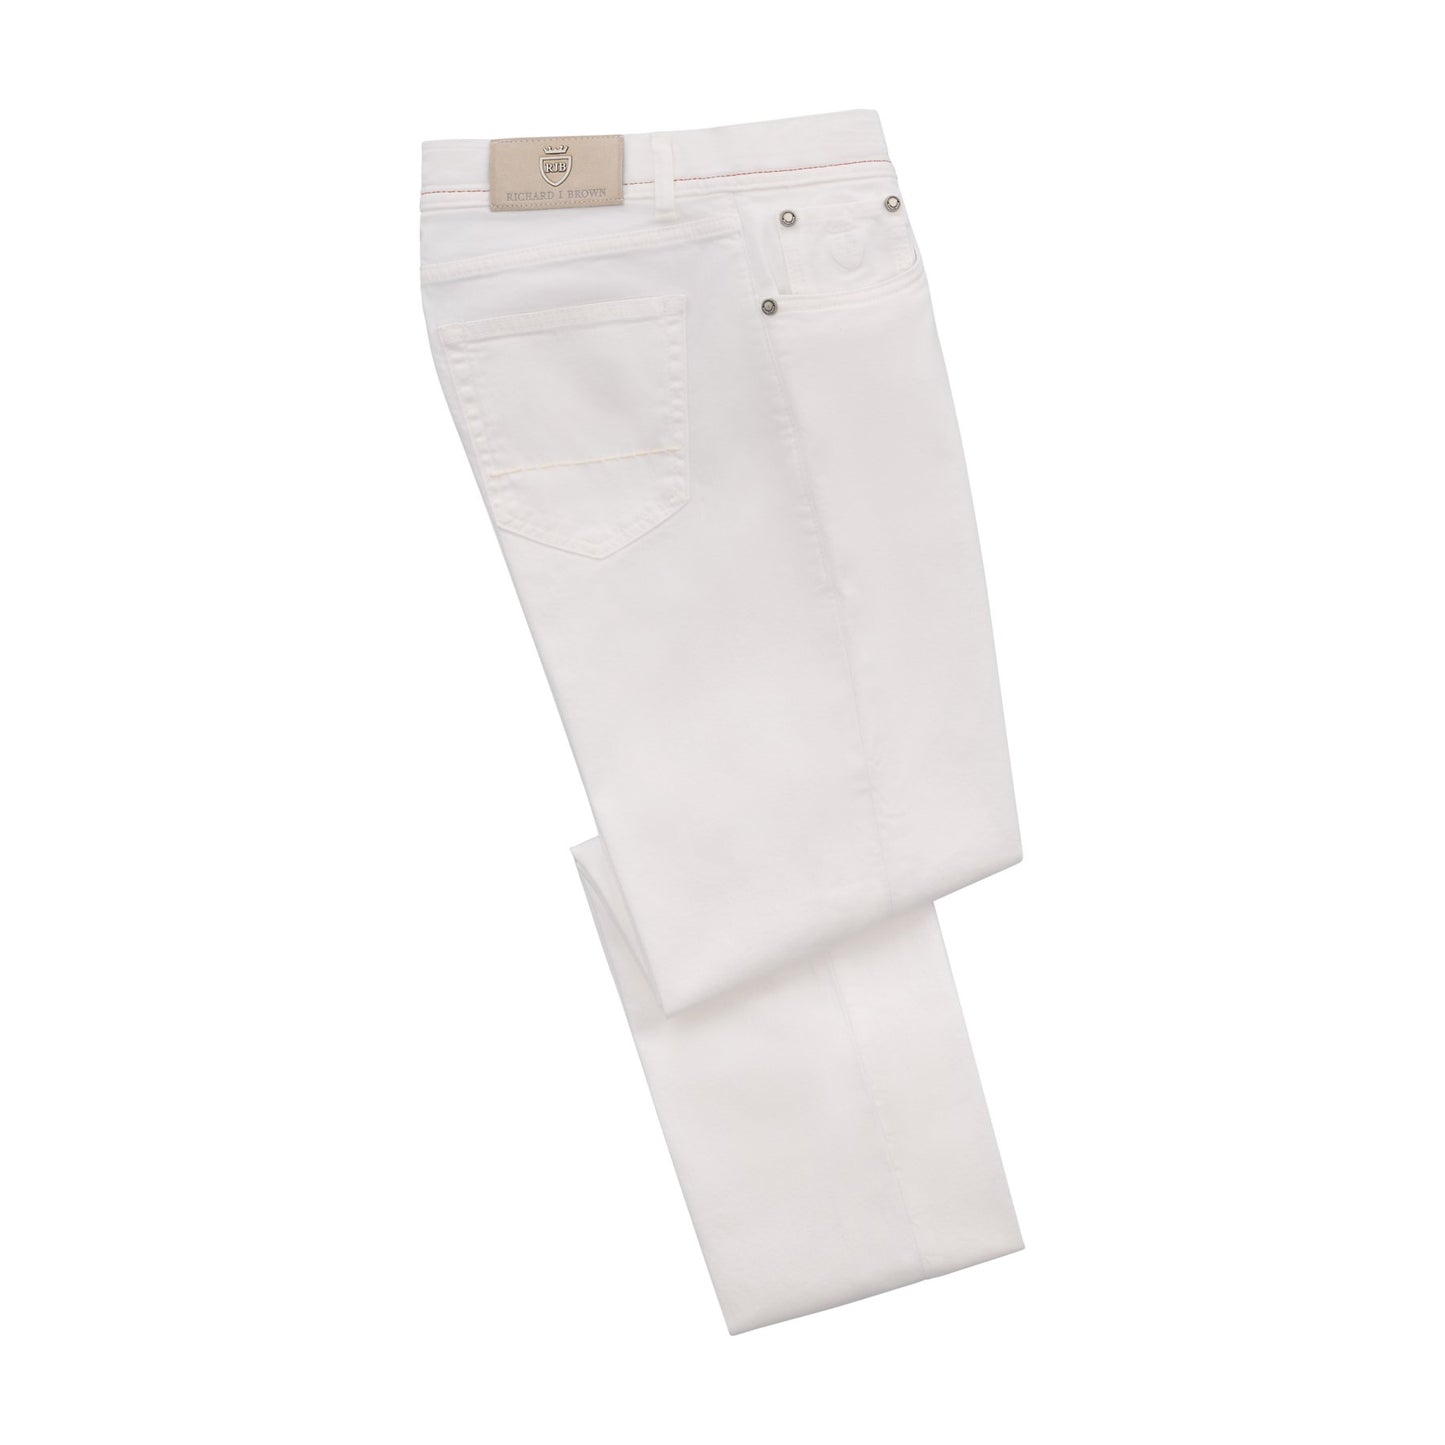 Richard J. Brown Slim - Fit Stretch - Cotton 5 Pocket Trousers in White - SARTALE